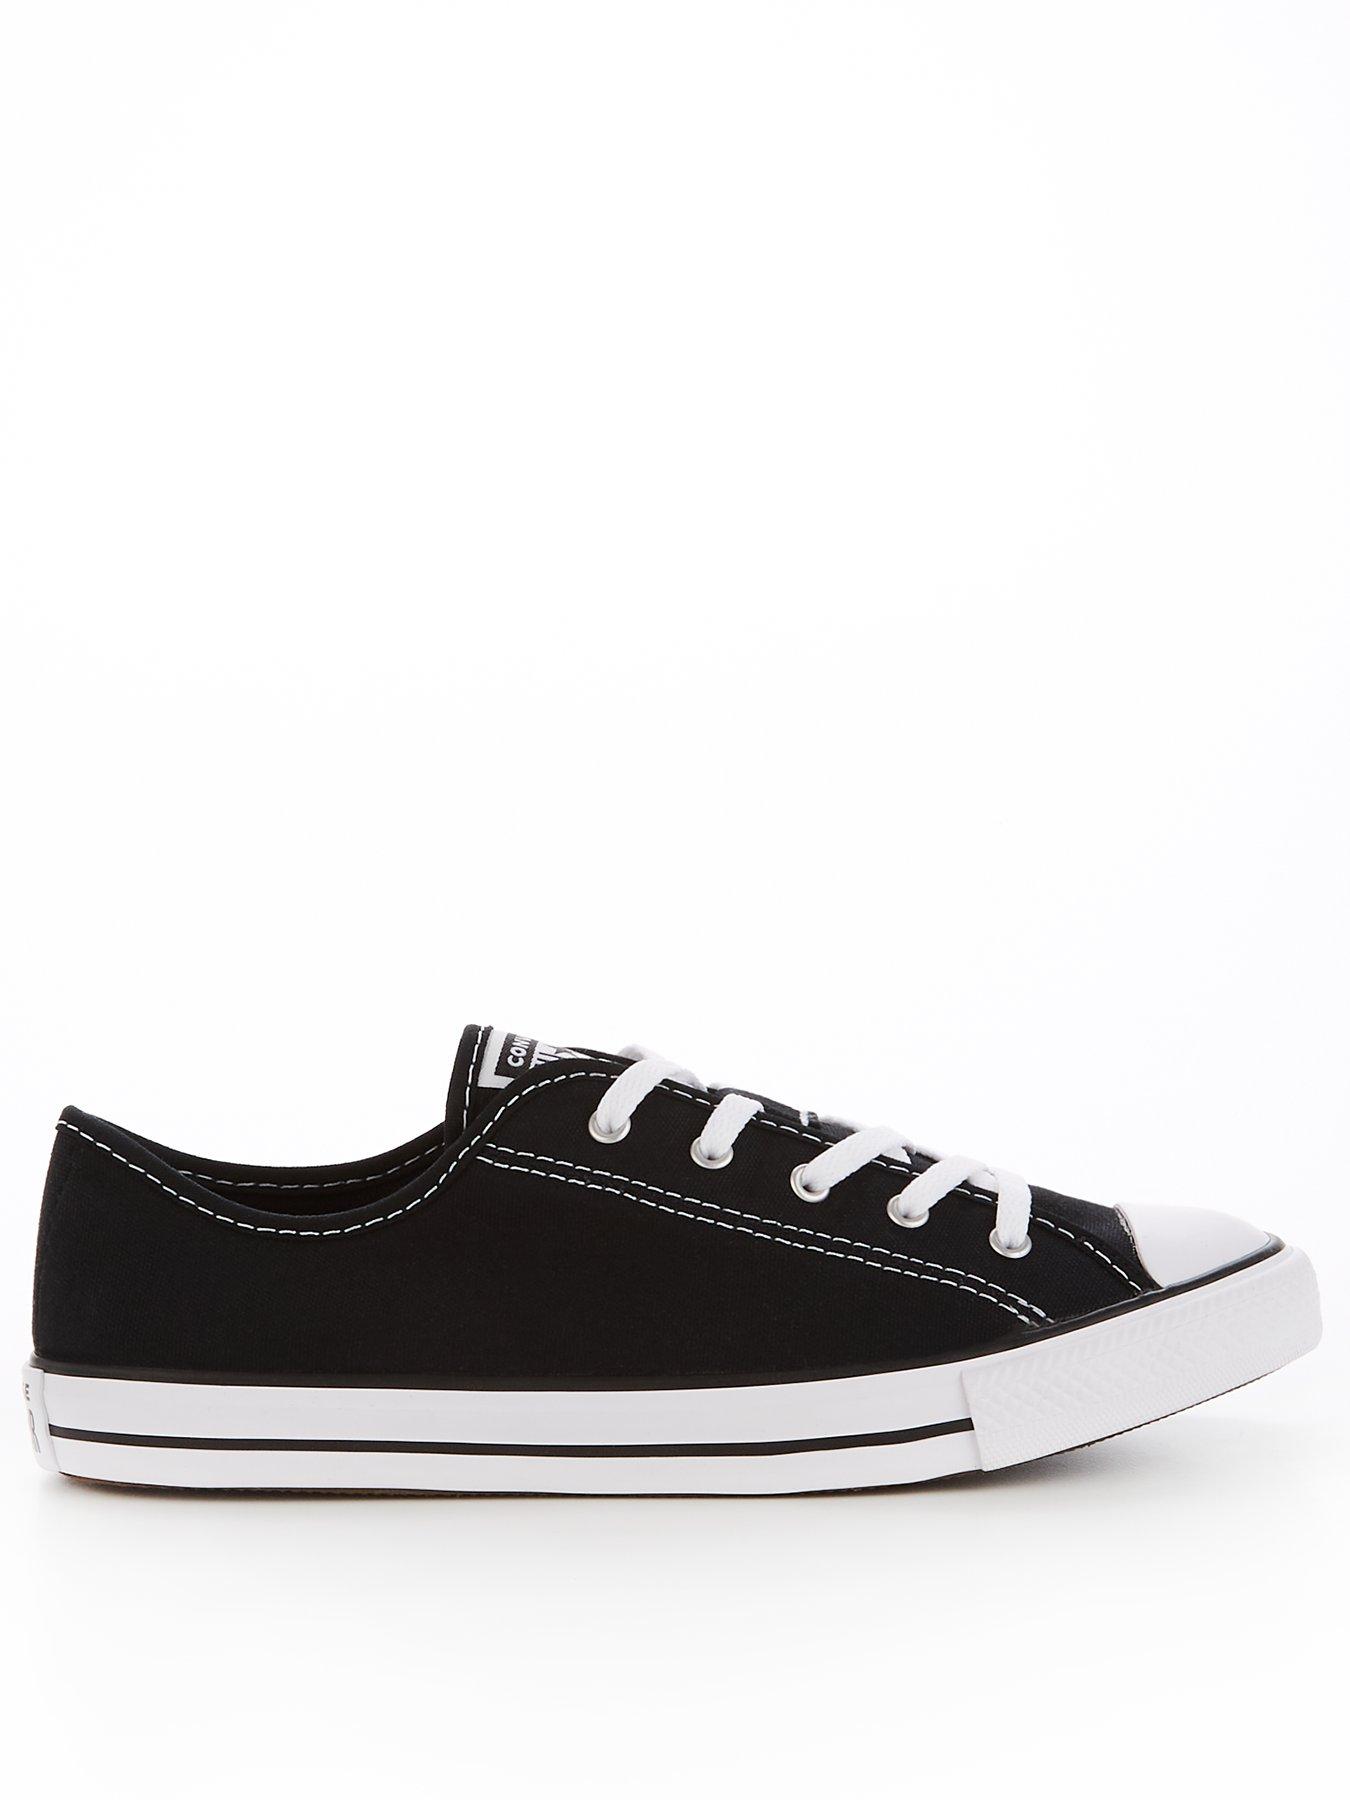 black converse trainers womens